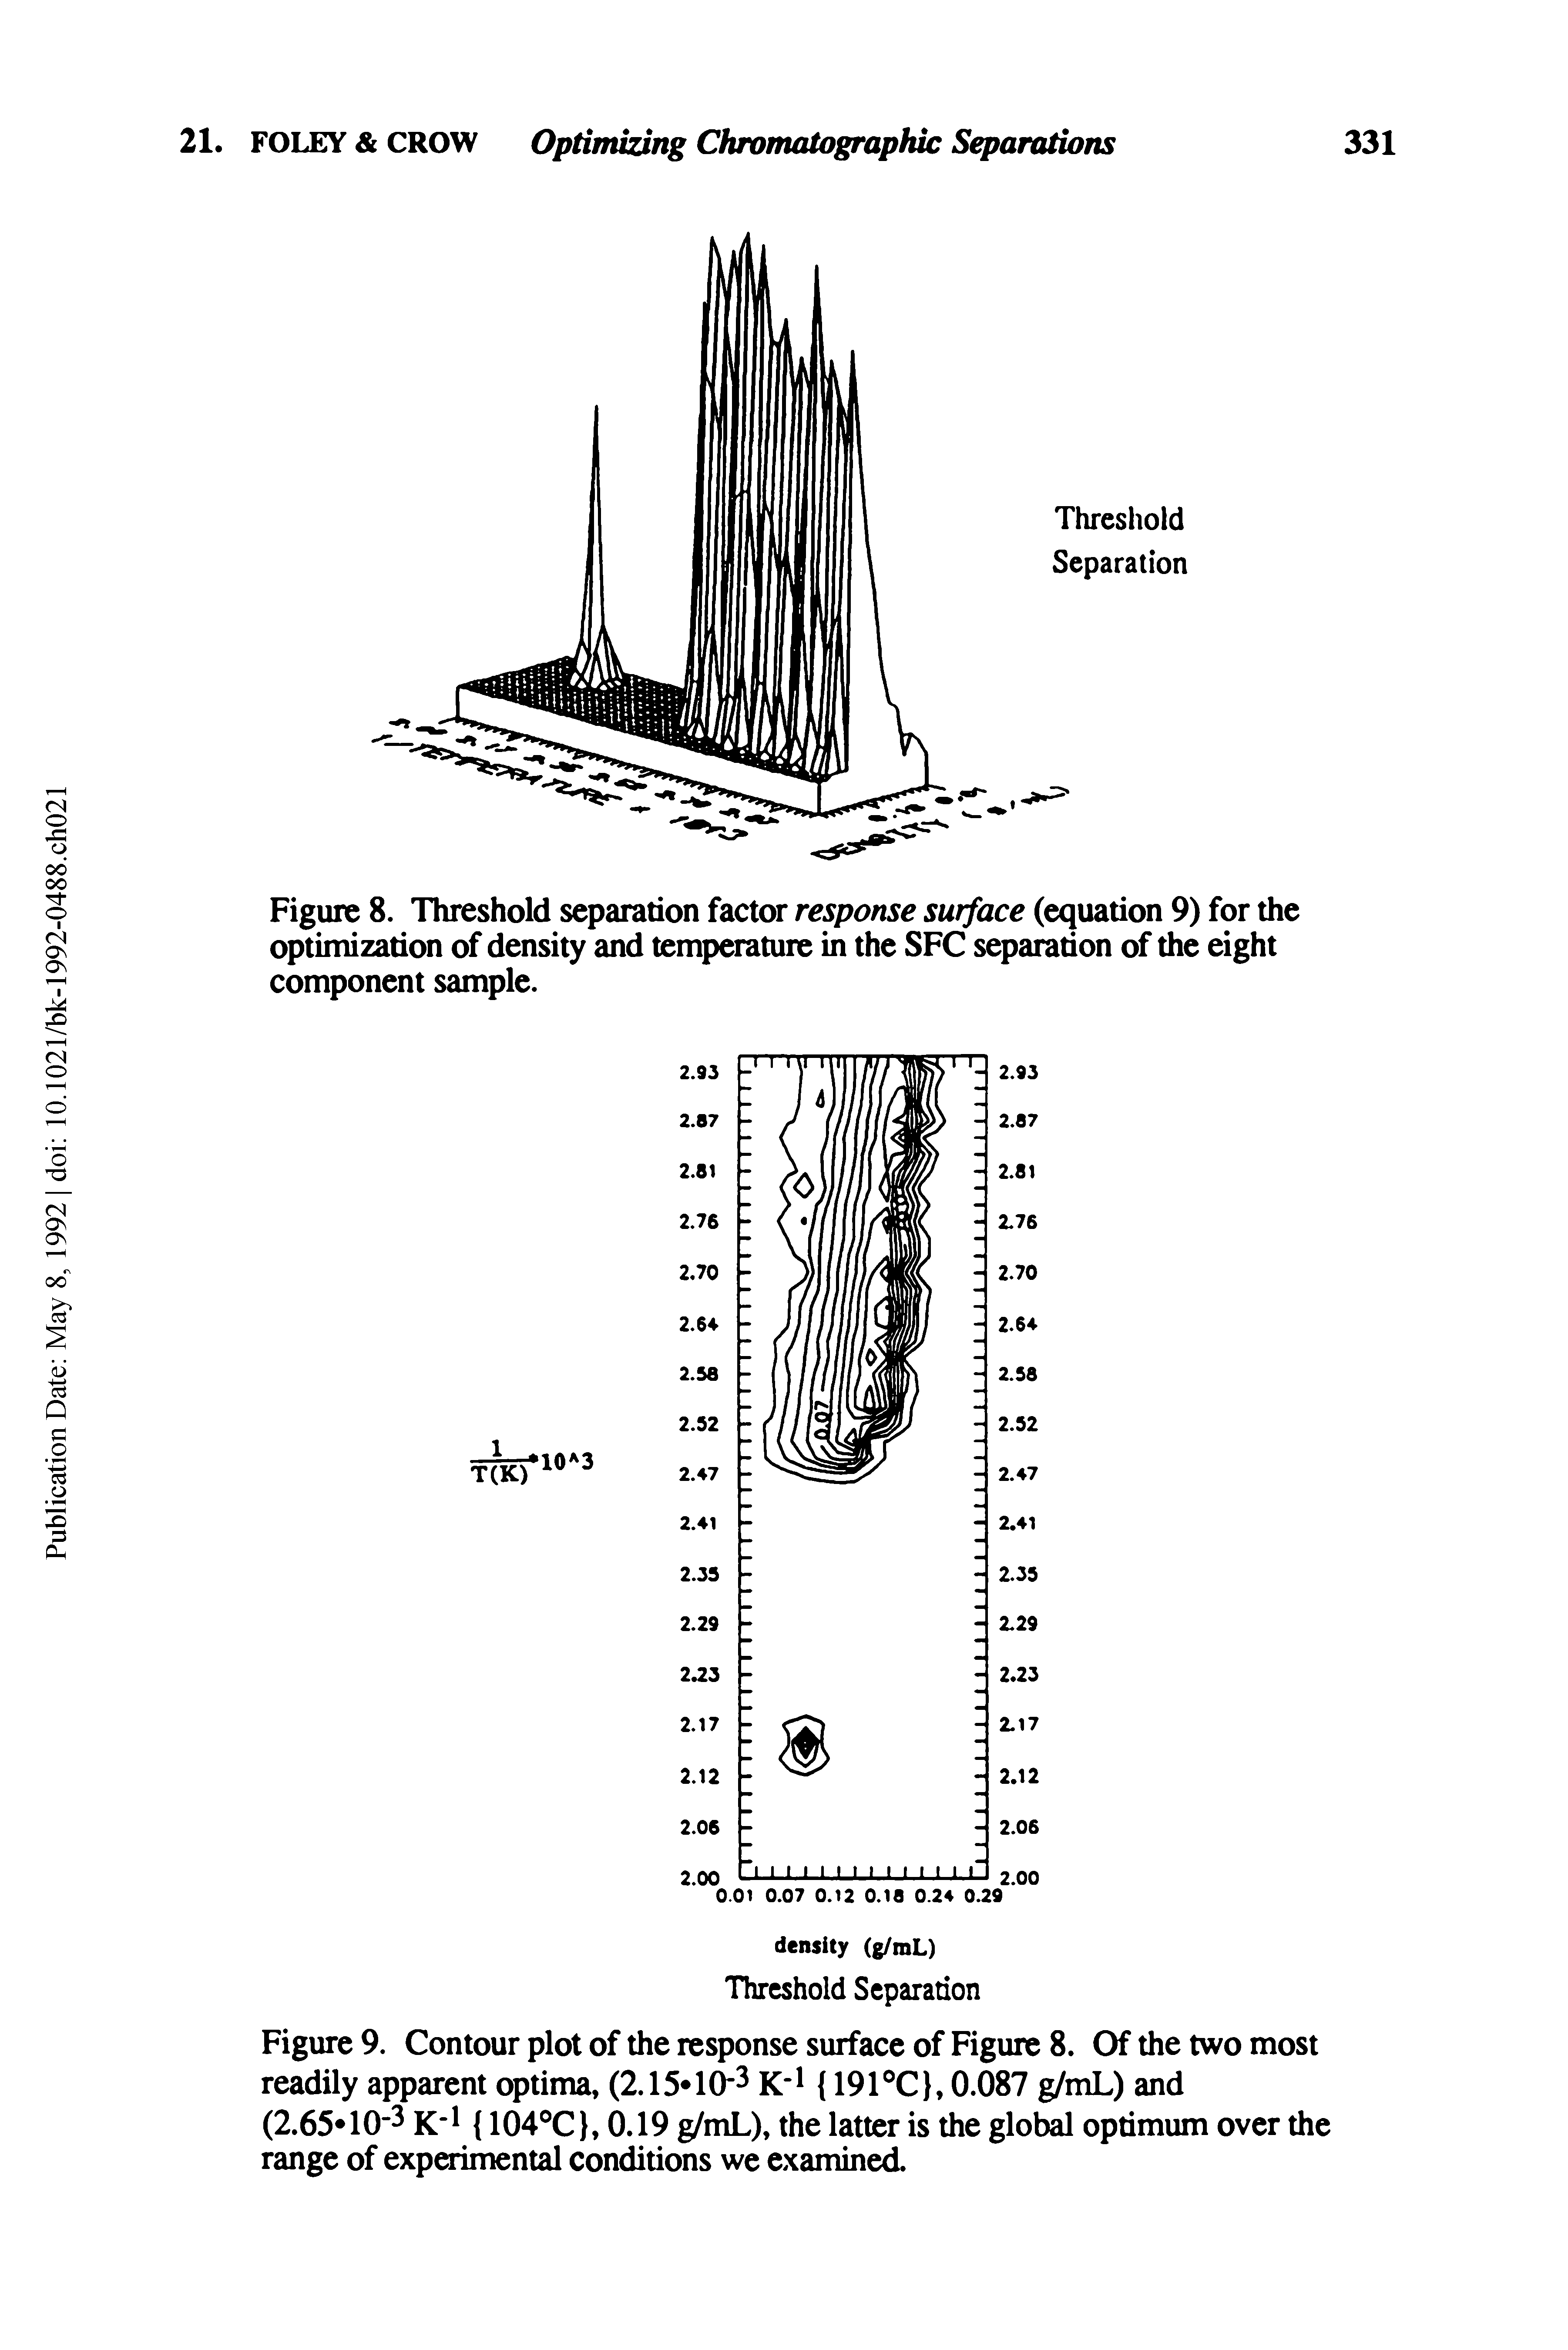 Figure 8. Threshold separation factor response surface (equation 9) for the optimization of density and temperature in the SFC separation of the eight component sample.